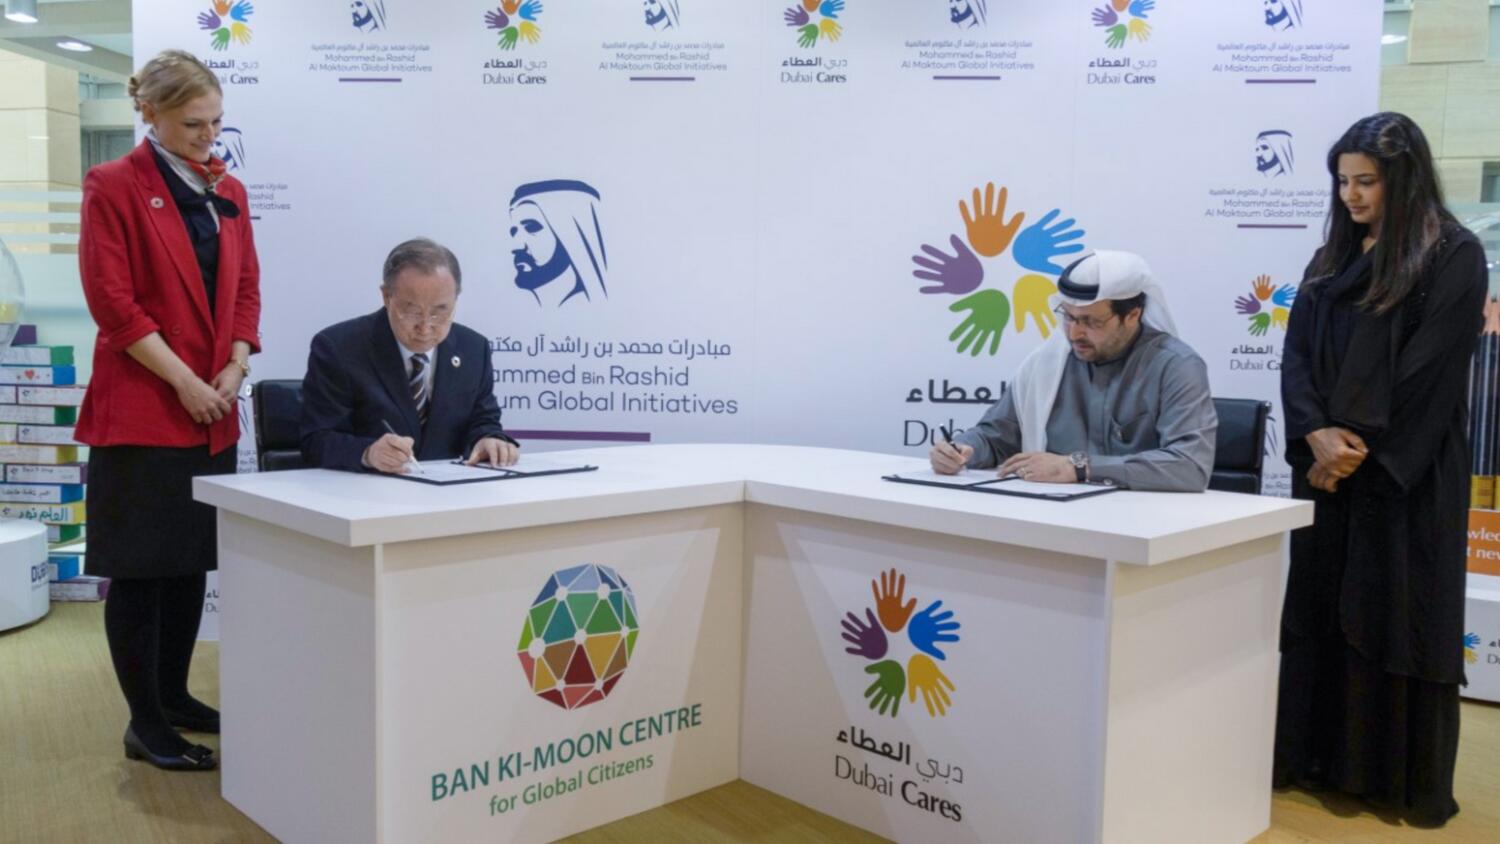 Dubai: New Cooperation Key Step Between Dubai Cares and GKMC for Climate Action Green Jobs with 10,000 Youth